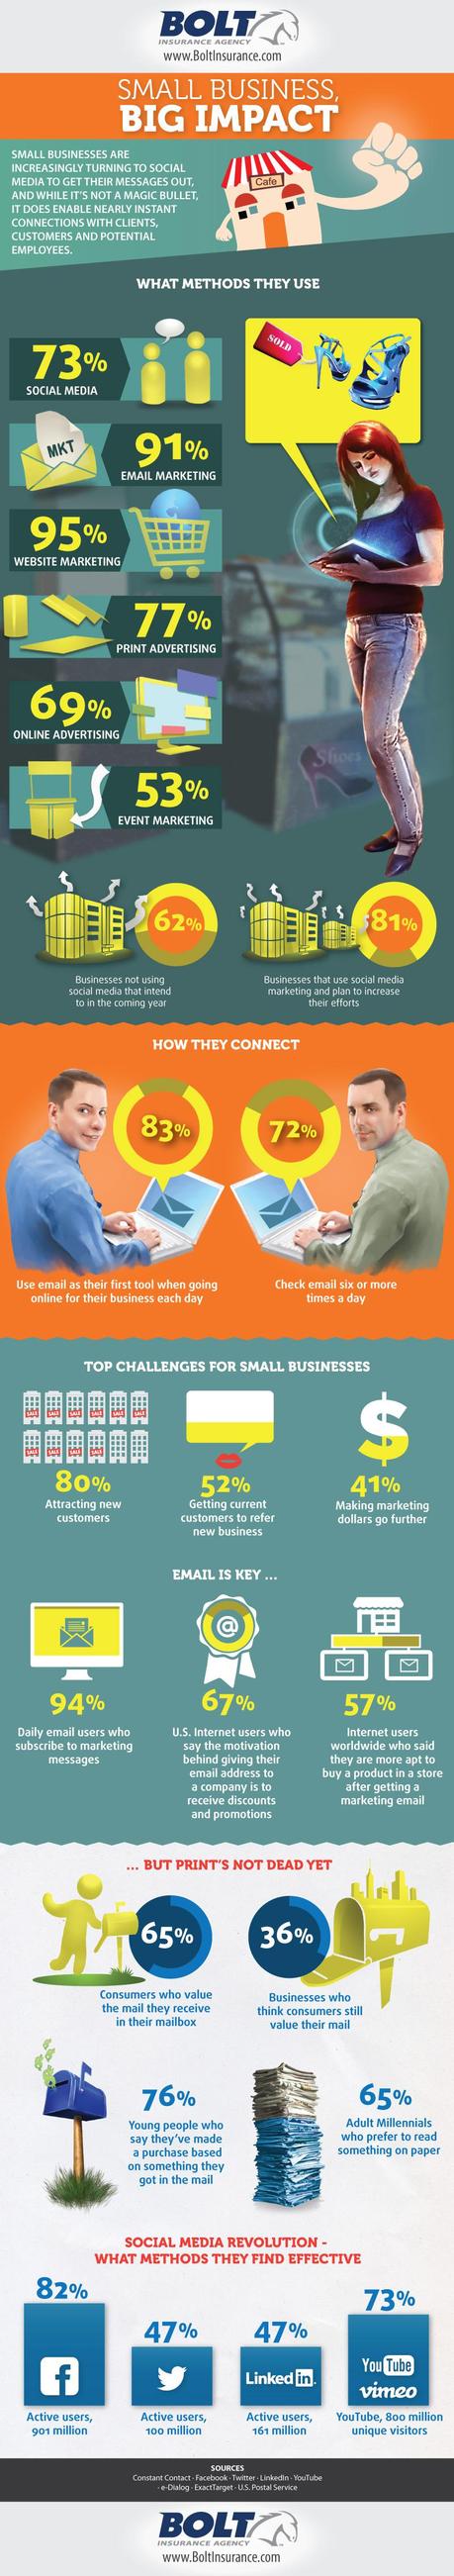 Infographic on Leading Small Business Marketing Tactics